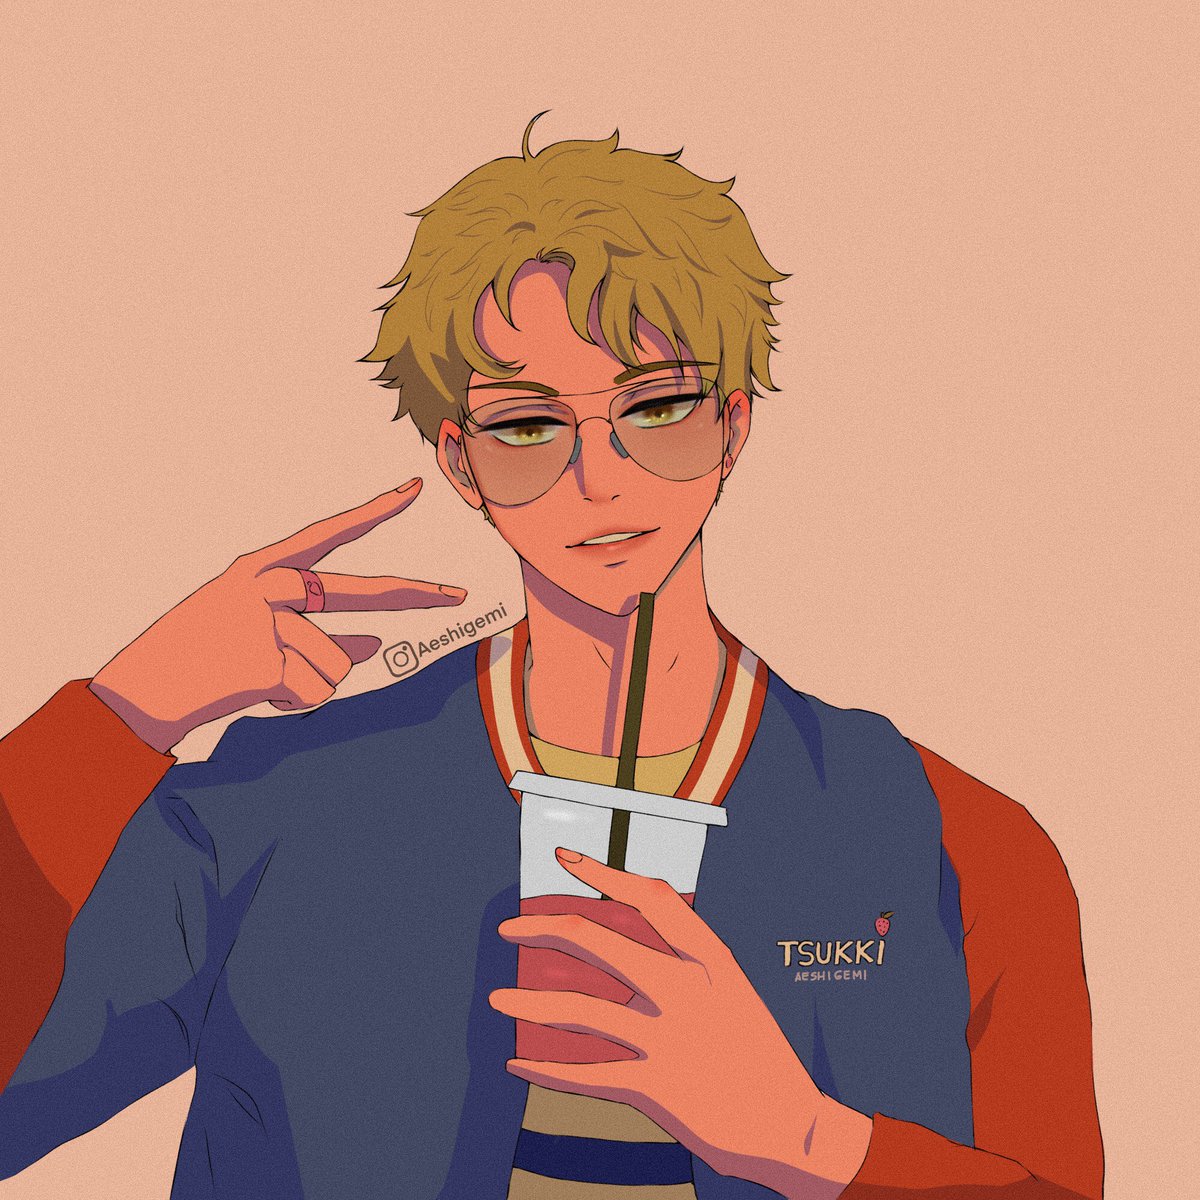 「Tsukki but in retro style ✨ 」|aeshi 🍙 commission OPENのイラスト